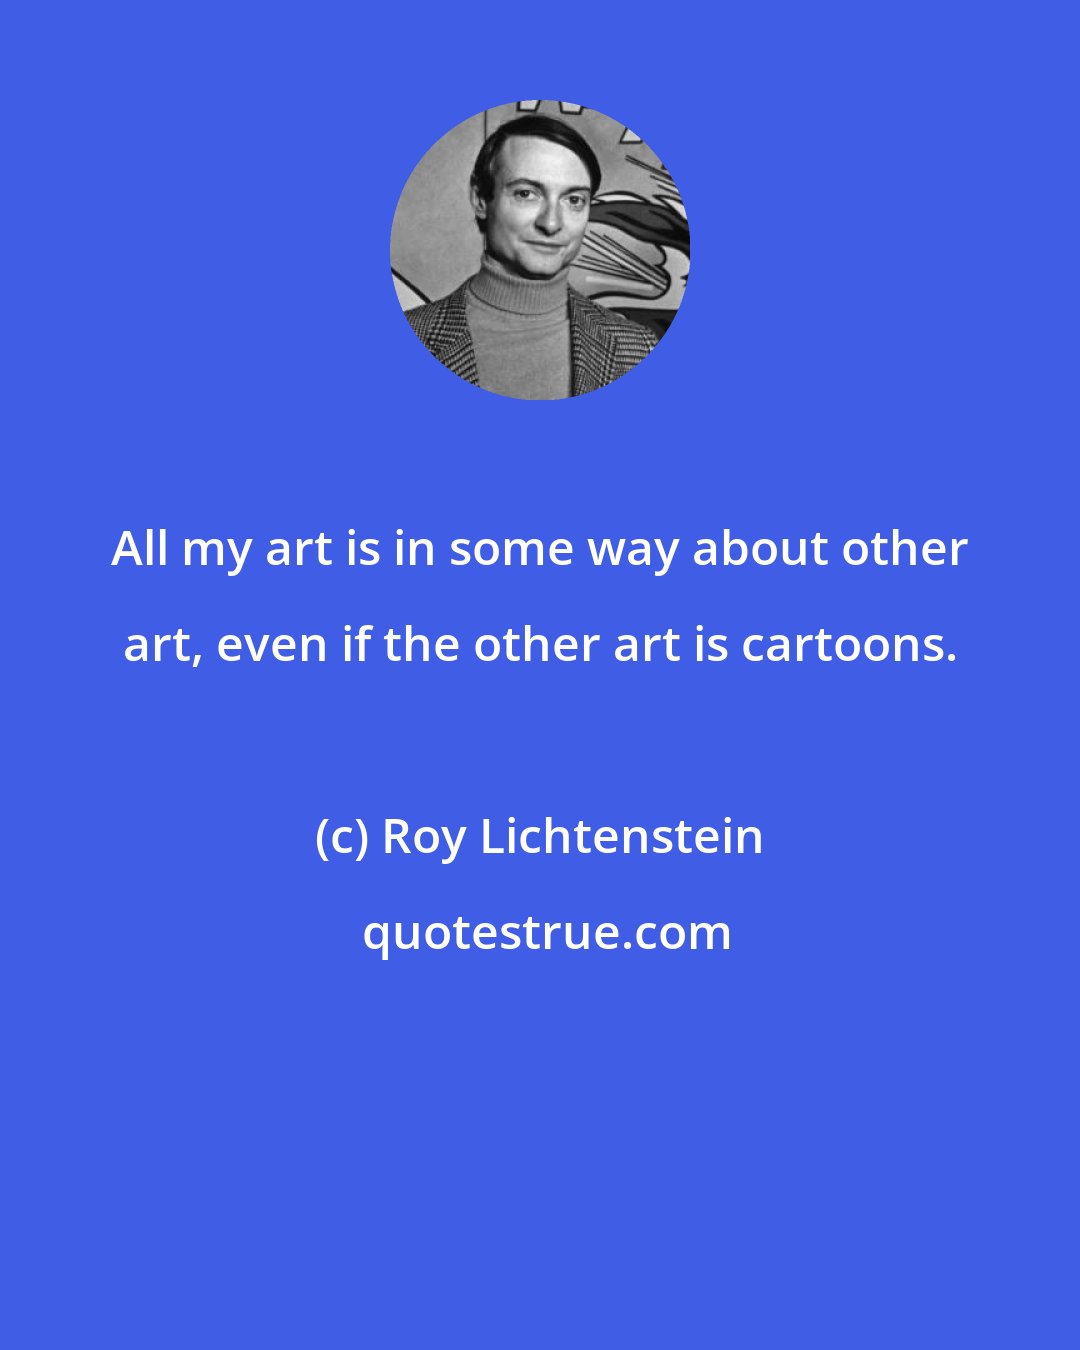 Roy Lichtenstein: All my art is in some way about other art, even if the other art is cartoons.